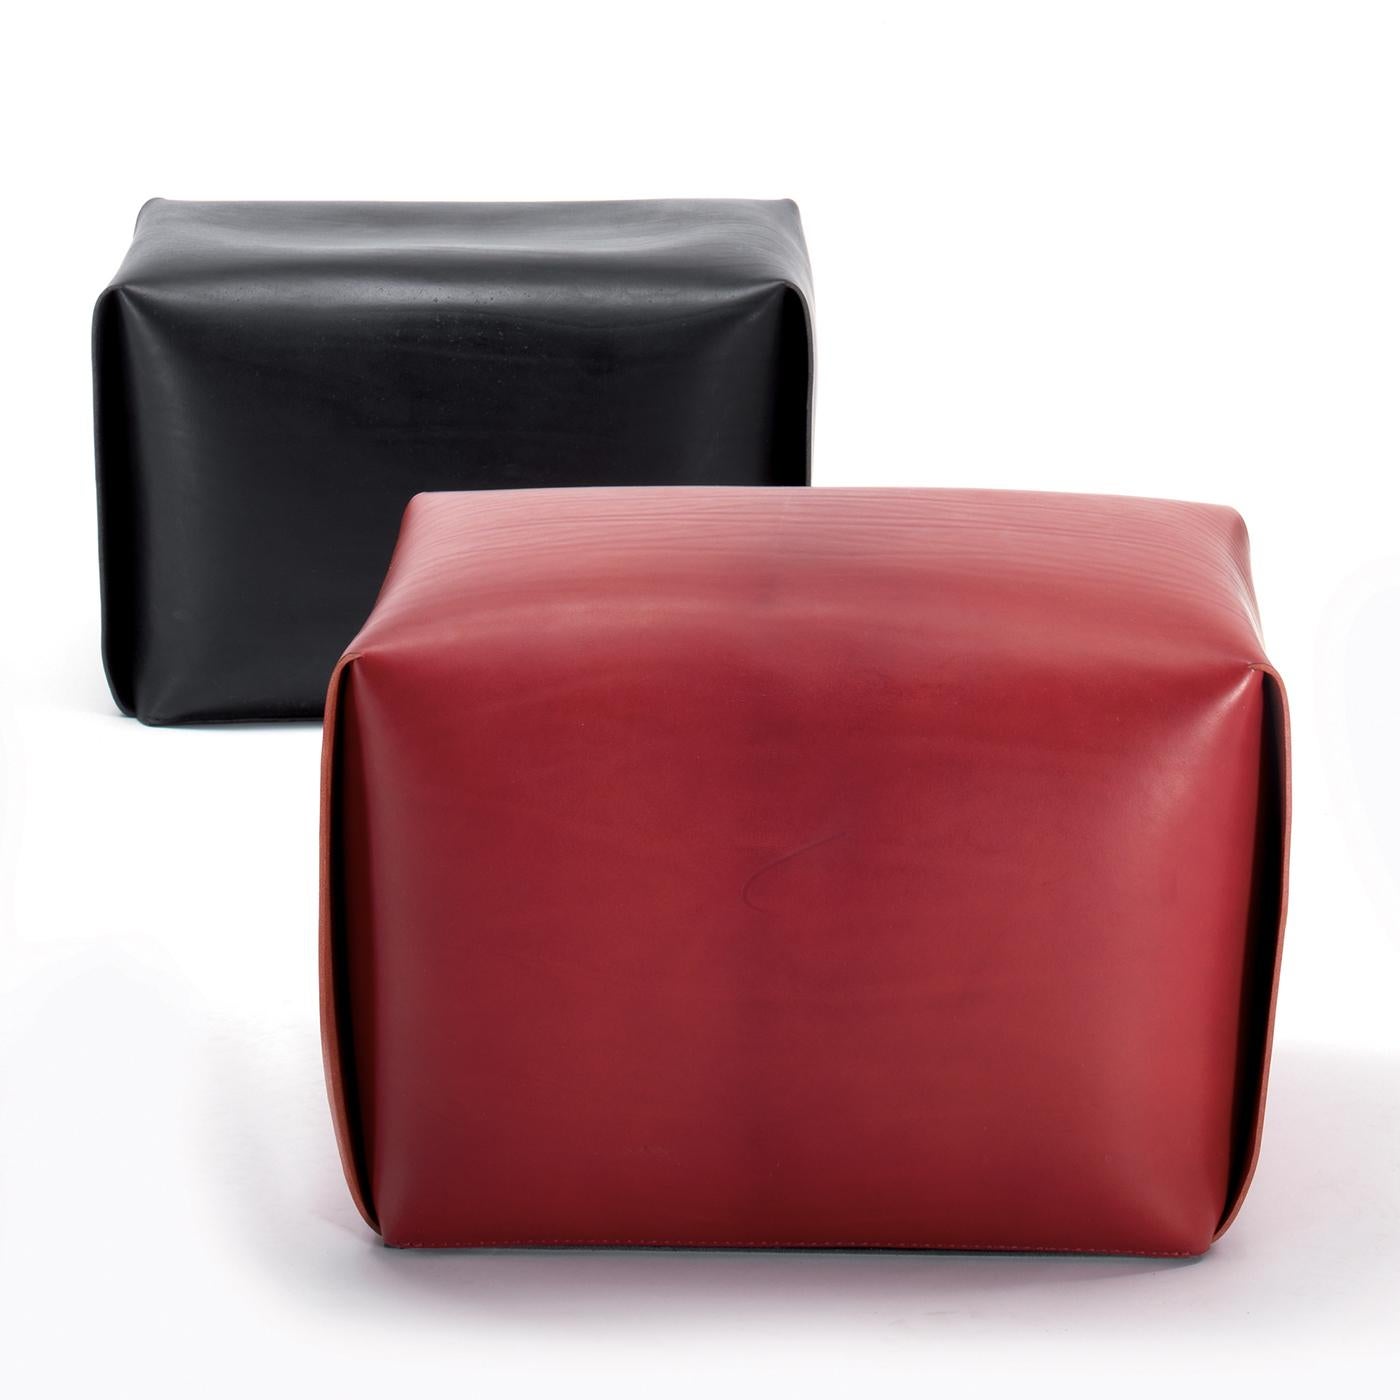 Part of the Bao collection of ottomans, this striking red leather piece will make a statement in any modern interior, adding a pop of color to any living room or study. The softness of the frosted leather covers a comfortable interior made of